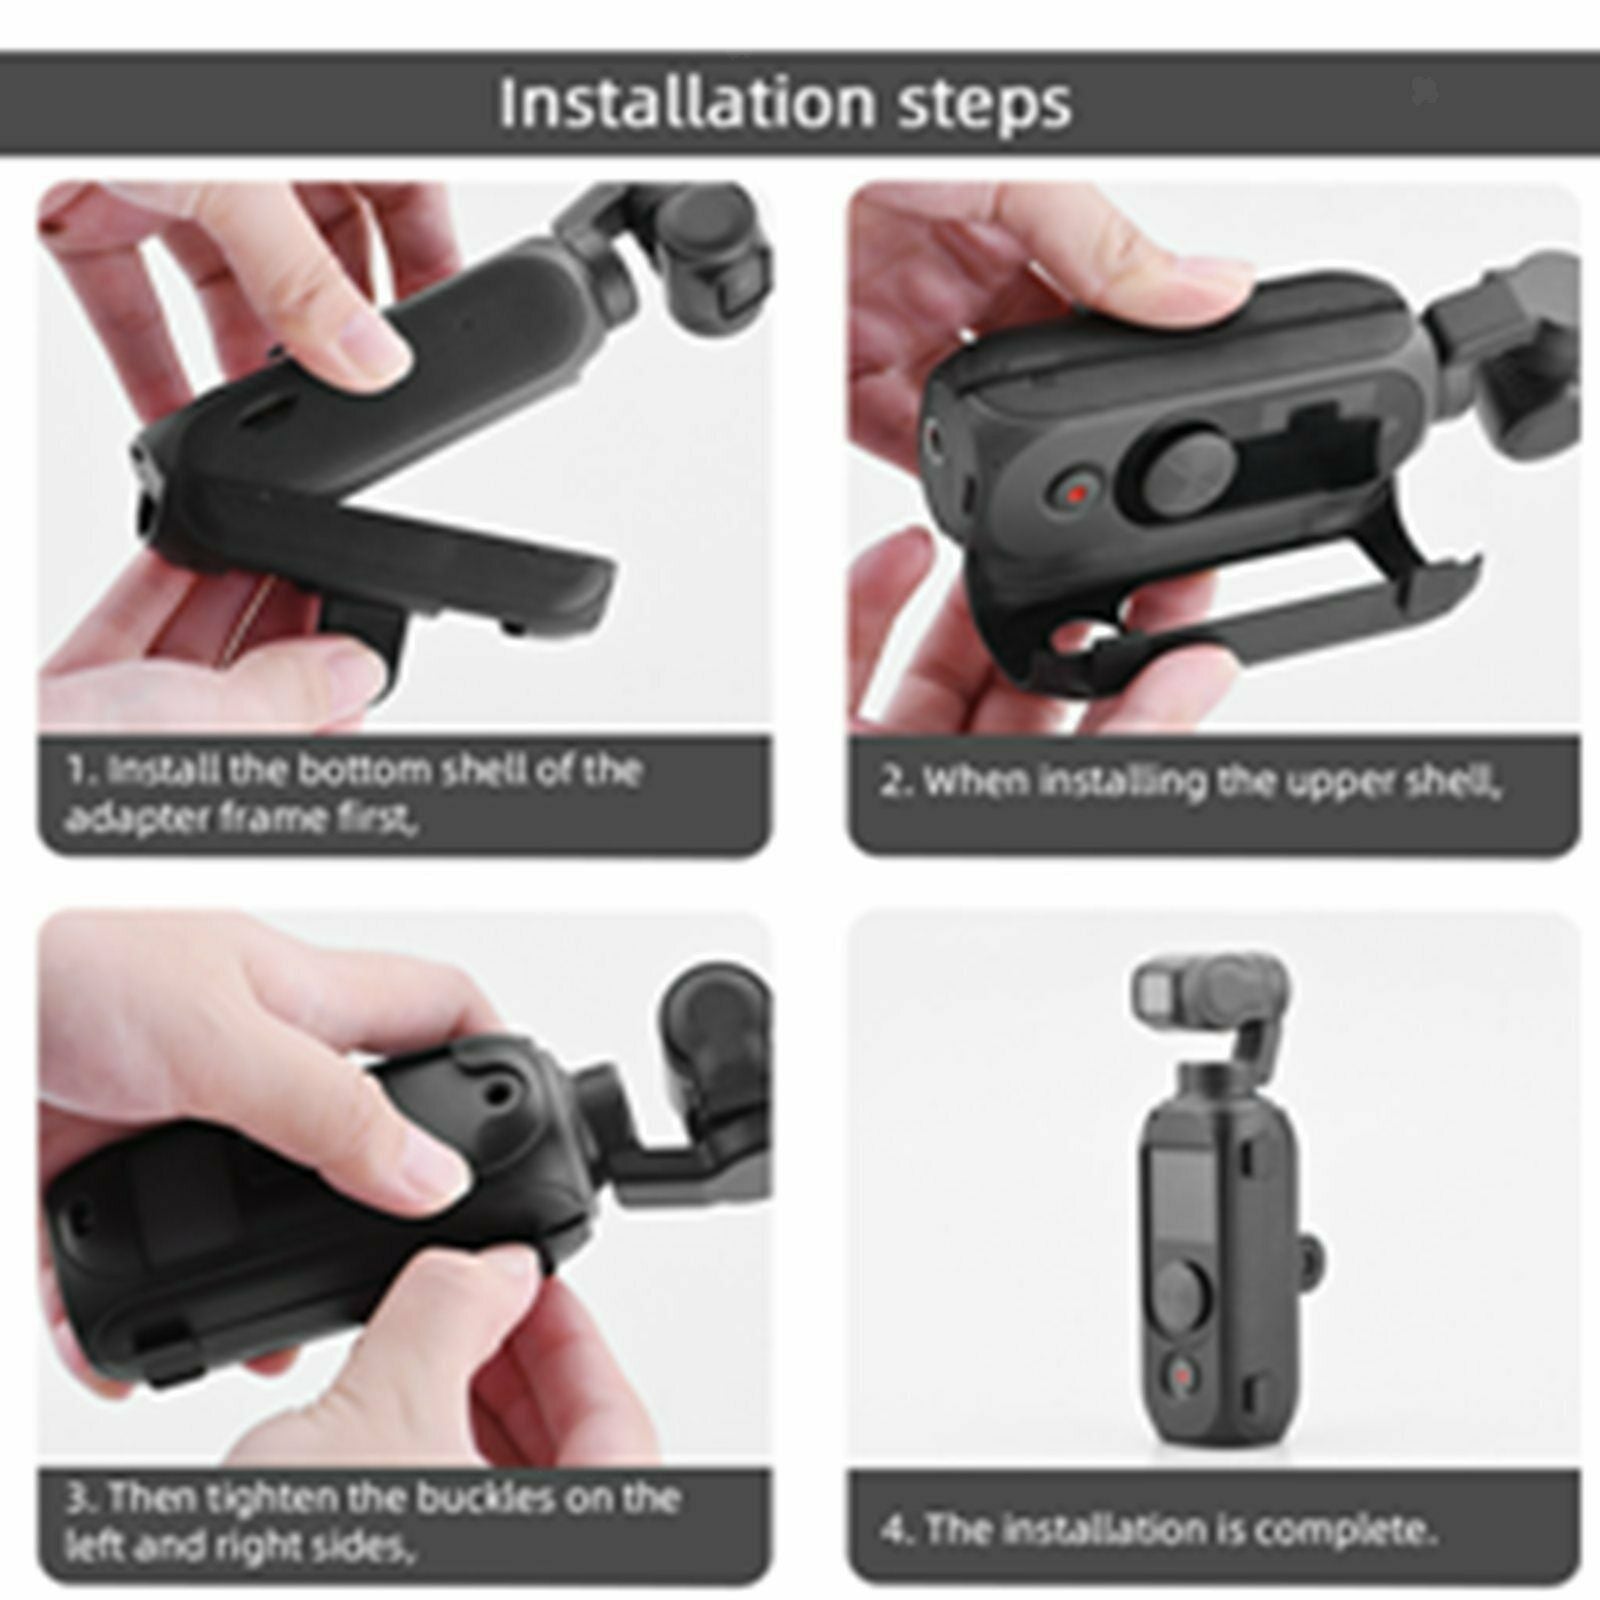 Waterproof Fixed Frame Bracket for FIMI PALM 2 Camera Mobile Phones Riding